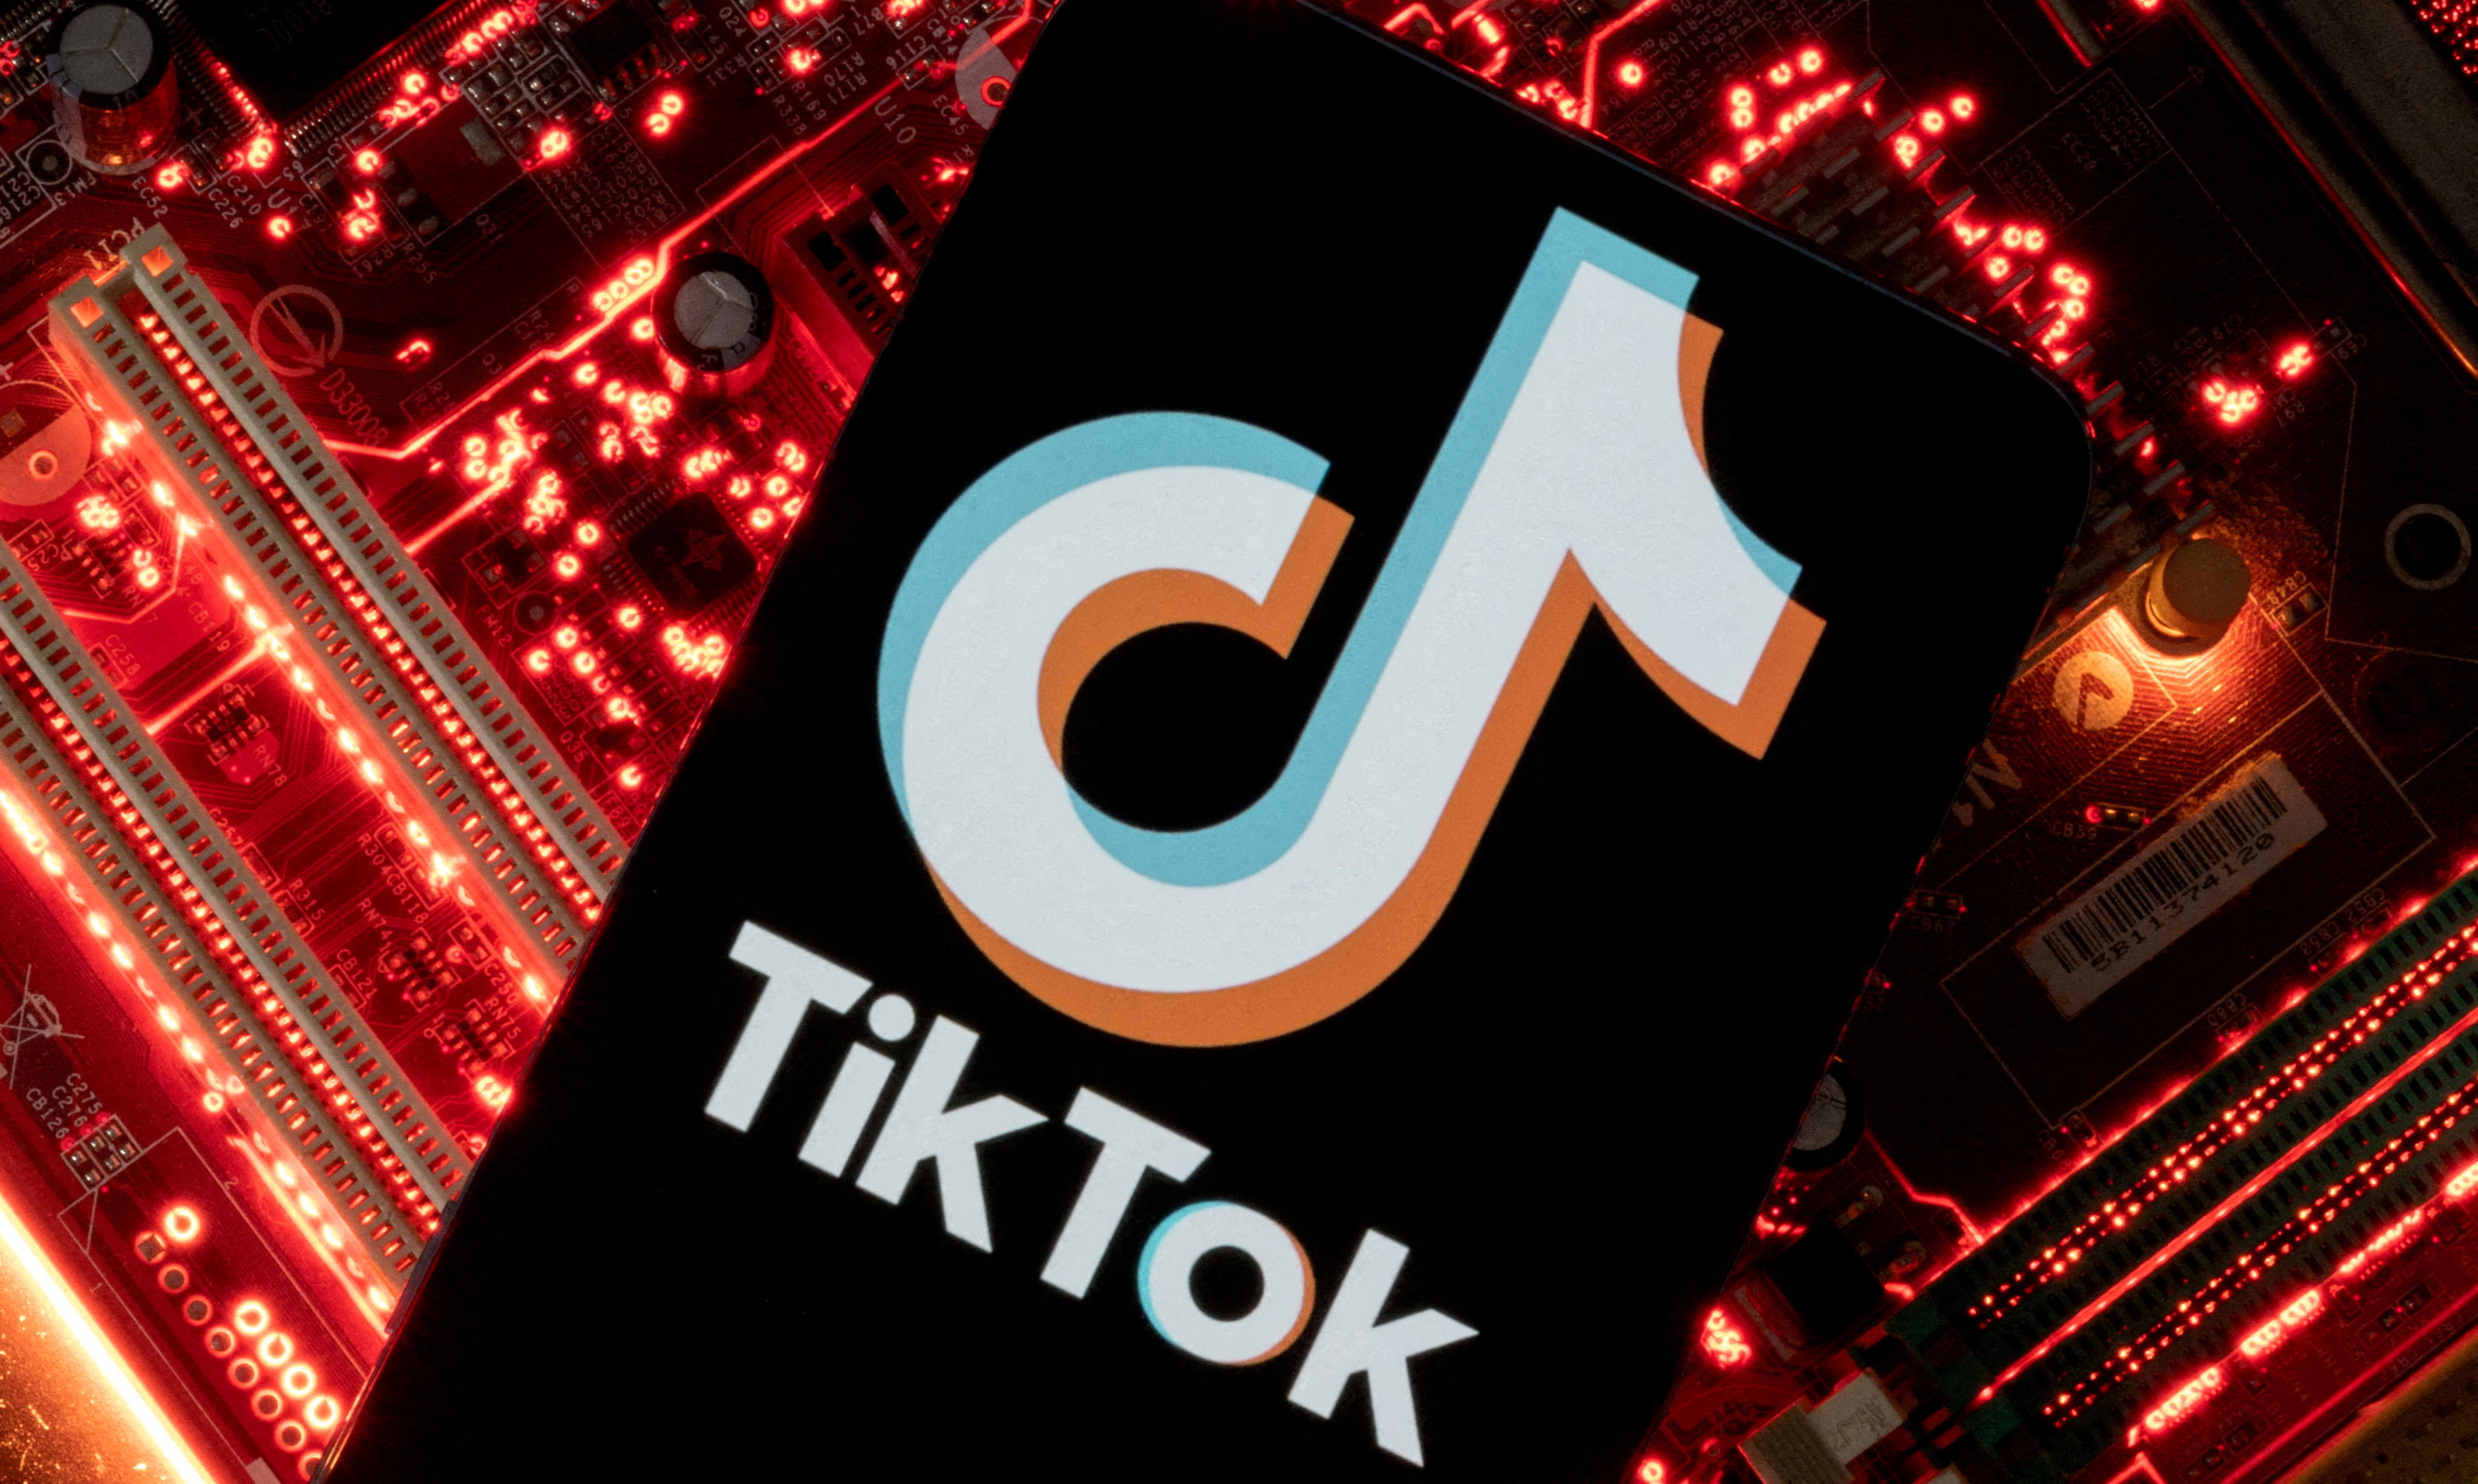 TikTokker must gain permission from people featured in his videos, UK judge said. Photo: Reuters